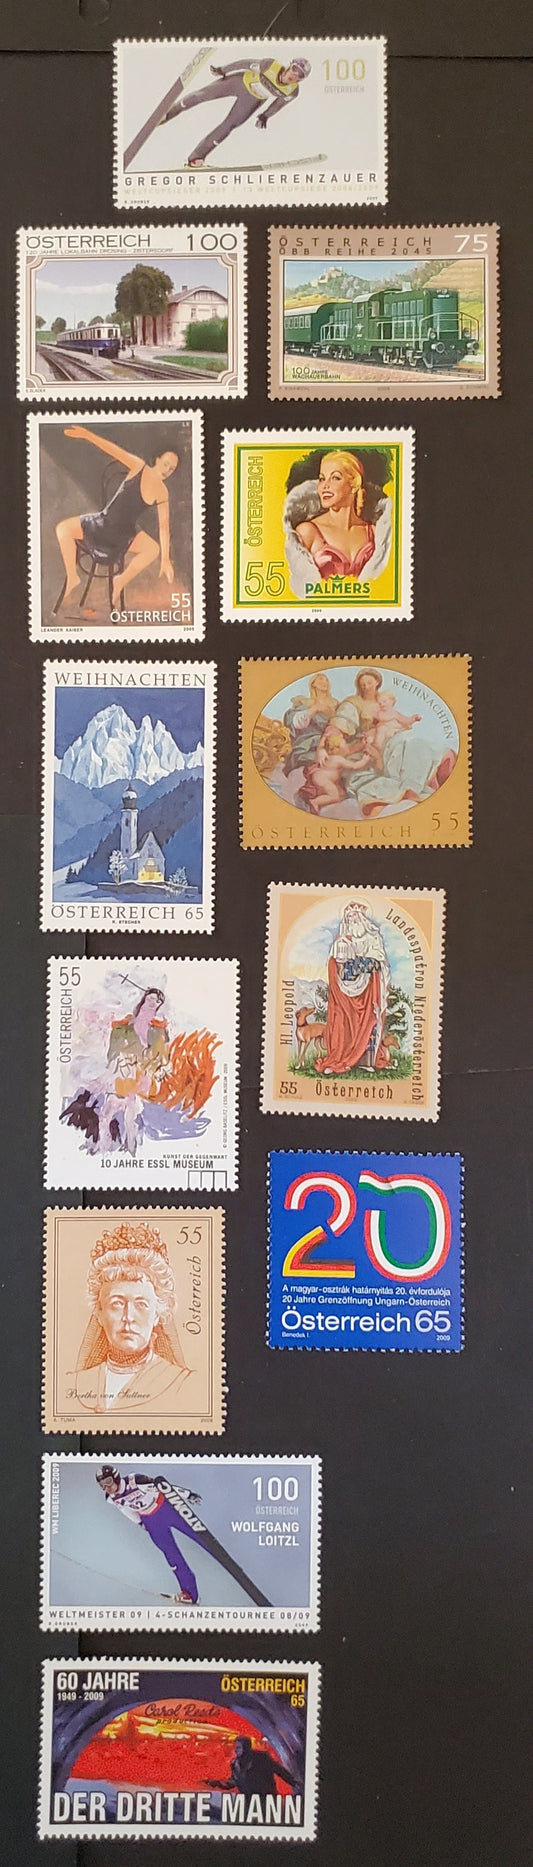 Lot 86 Austria SC#2218/2233 2009 60th Anniversary Of The Third Men - Essl Museu 10th Anniv, 13 VFNH Singles, Click on Listing to See ALL Pictures, 2017 Scott Cat. $23.4